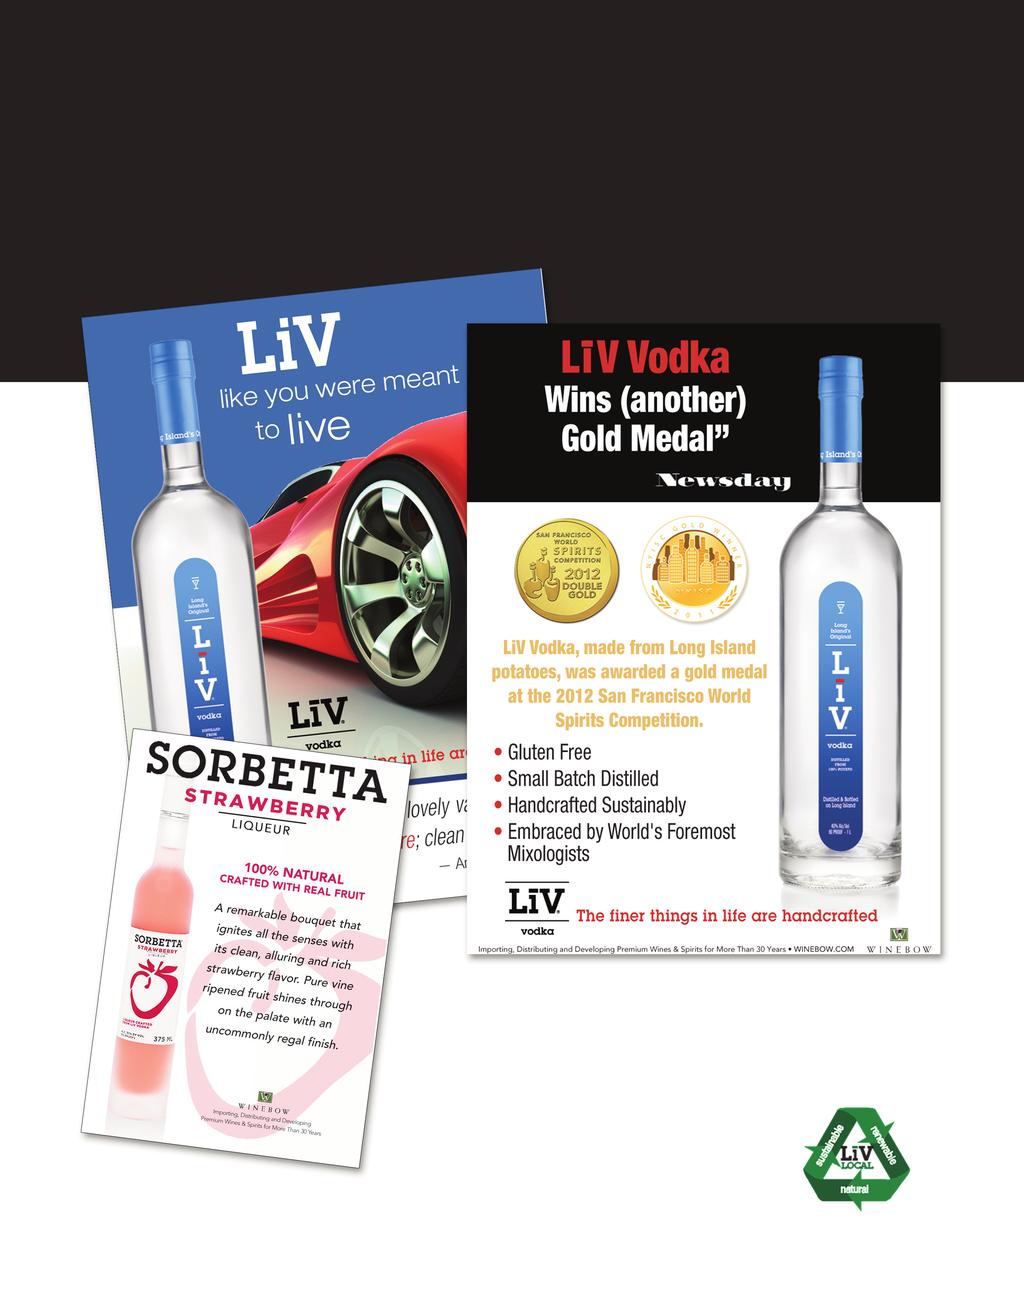 our pos LiV and Sorbetta point of sale Shelf talkers, sell sheets and case cards available. Contact your sales representative. Visit us at: www.lispirits.